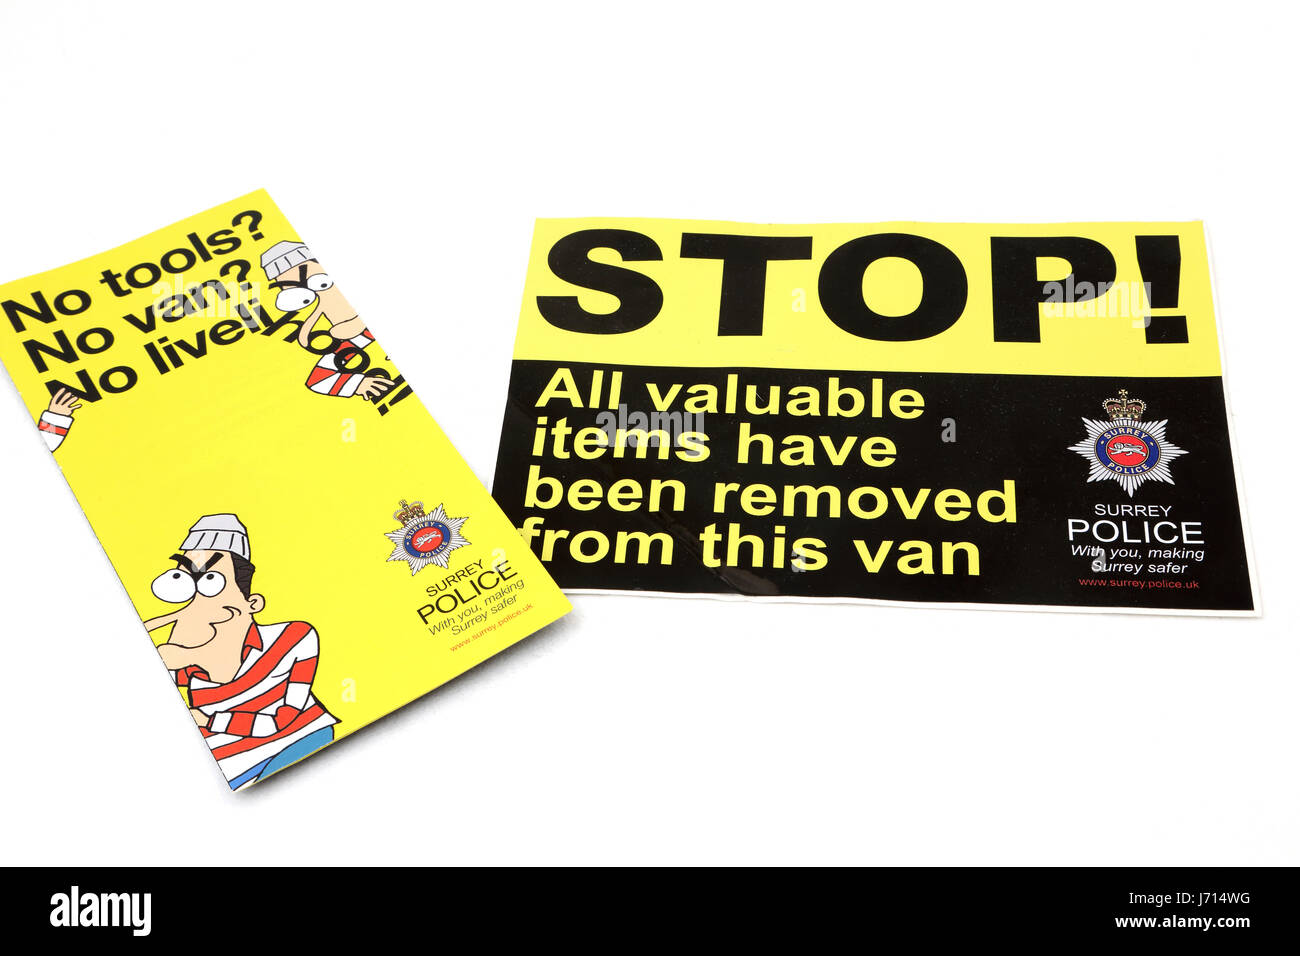 Police leaflet warning about commercial vehicle crime and crime prevention sticker Stock Photo